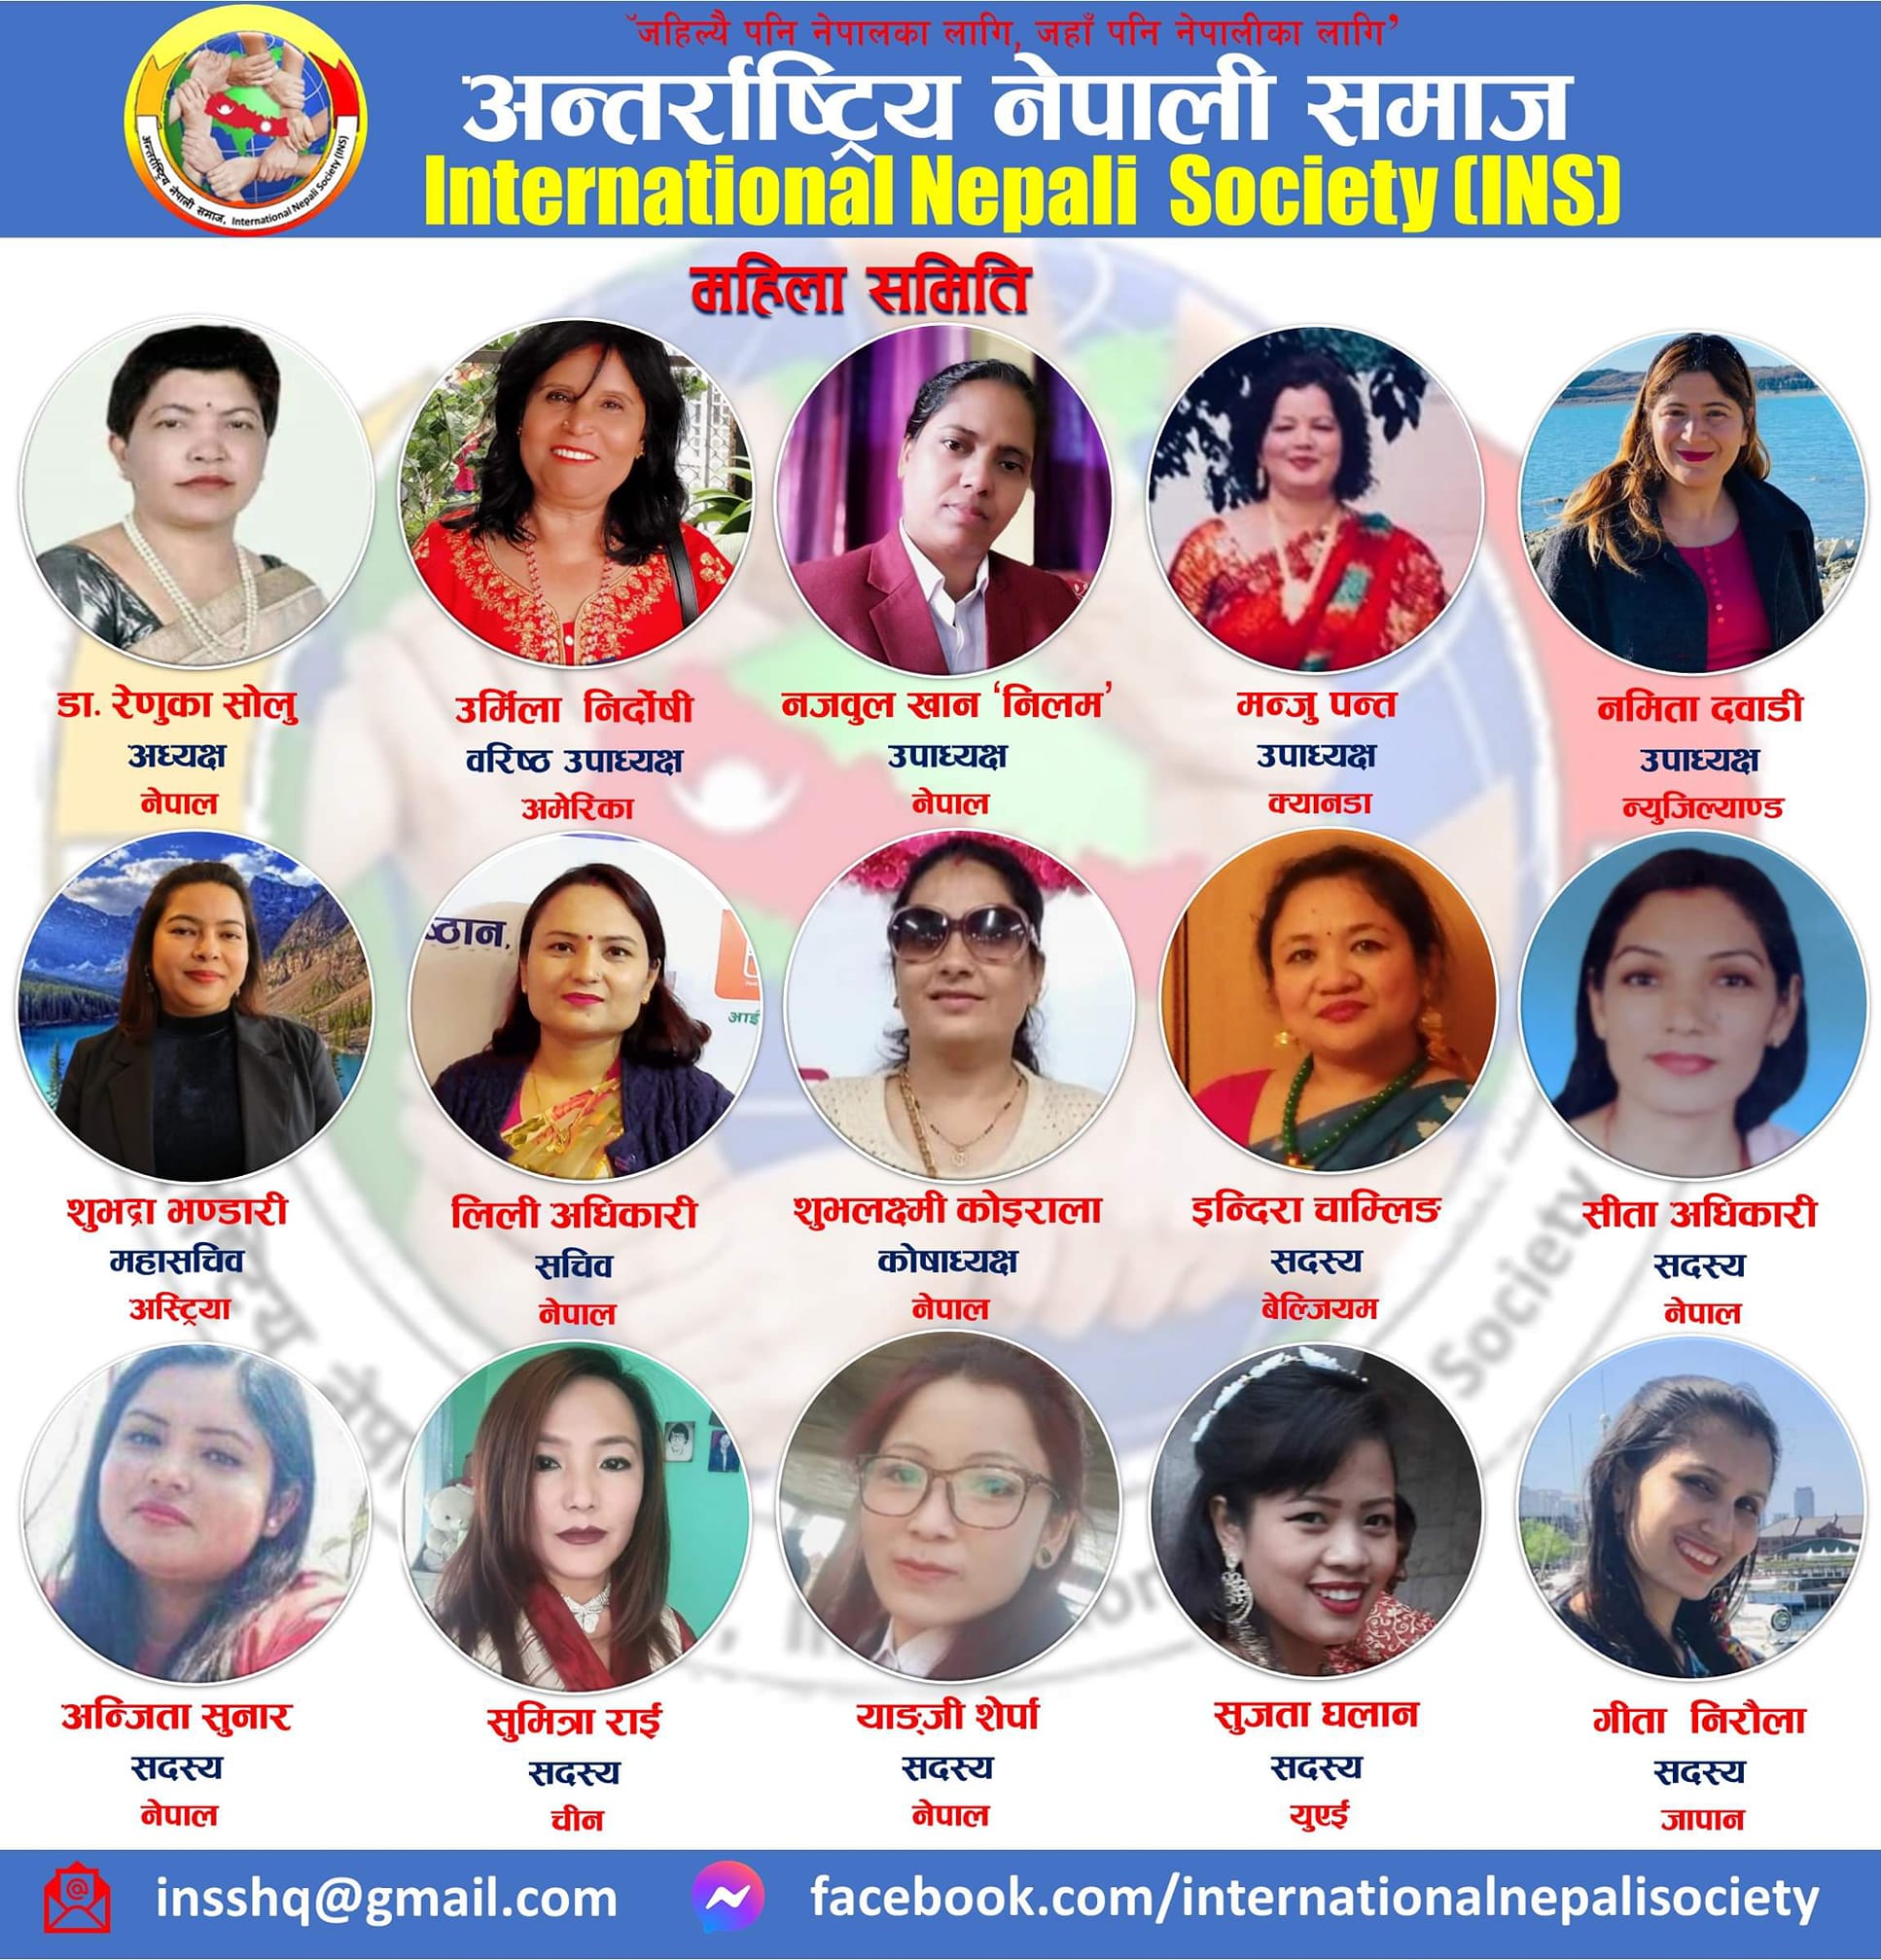 The International Nepali Society Women’s Committee was formed under the leadership of Dr. Renuka Solu